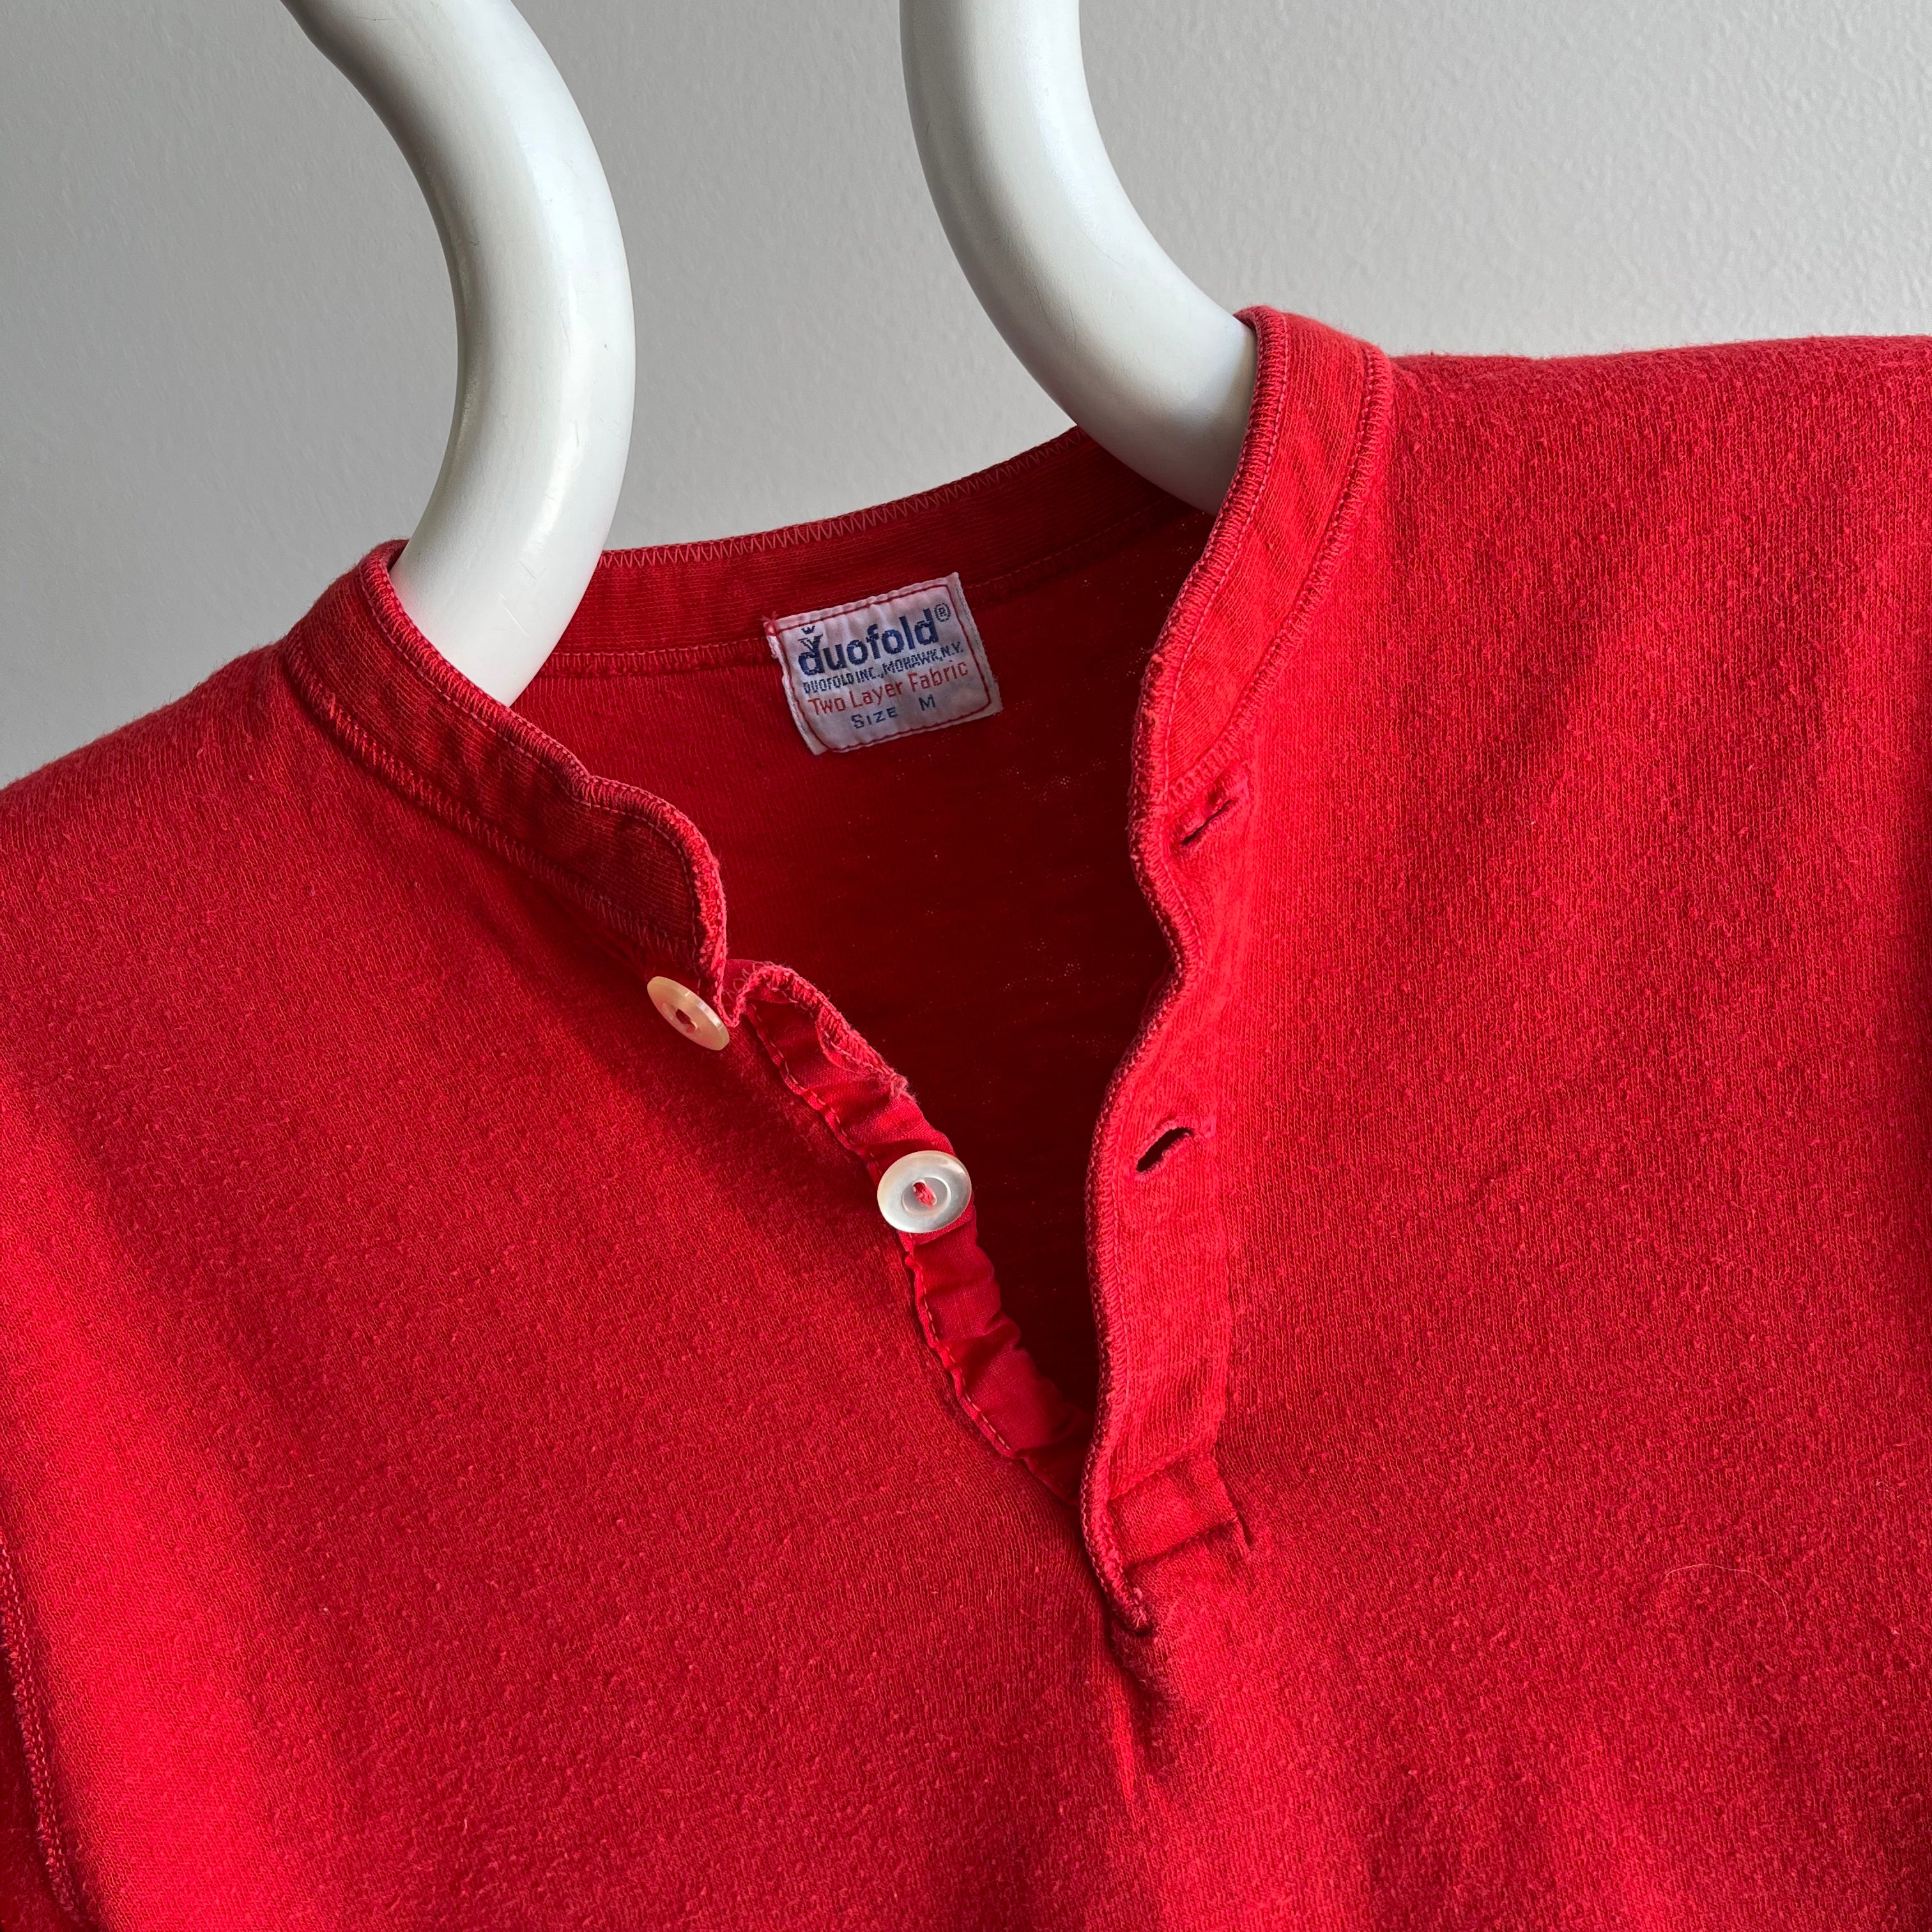 1960s Duofold Red Thermal Henley Long Sleeve